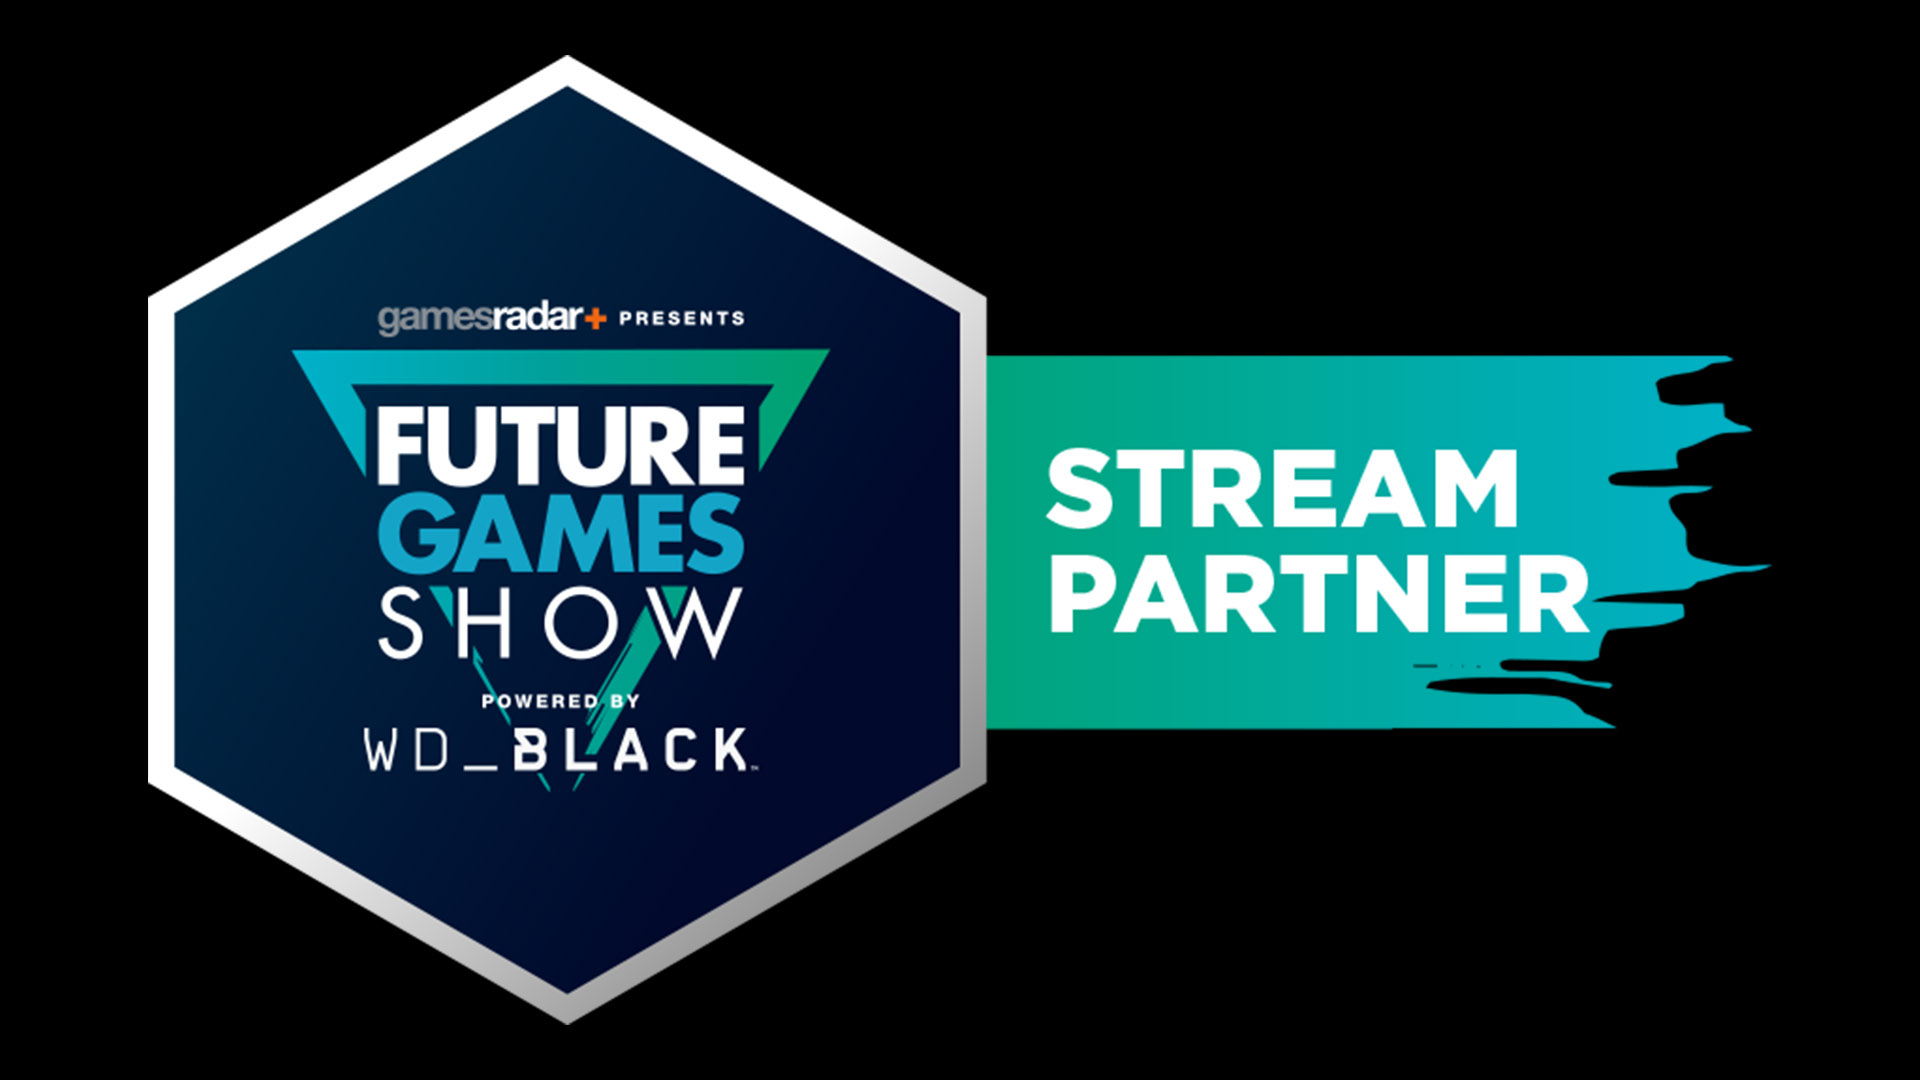 Future games show. Future games show logo. Future gaming show